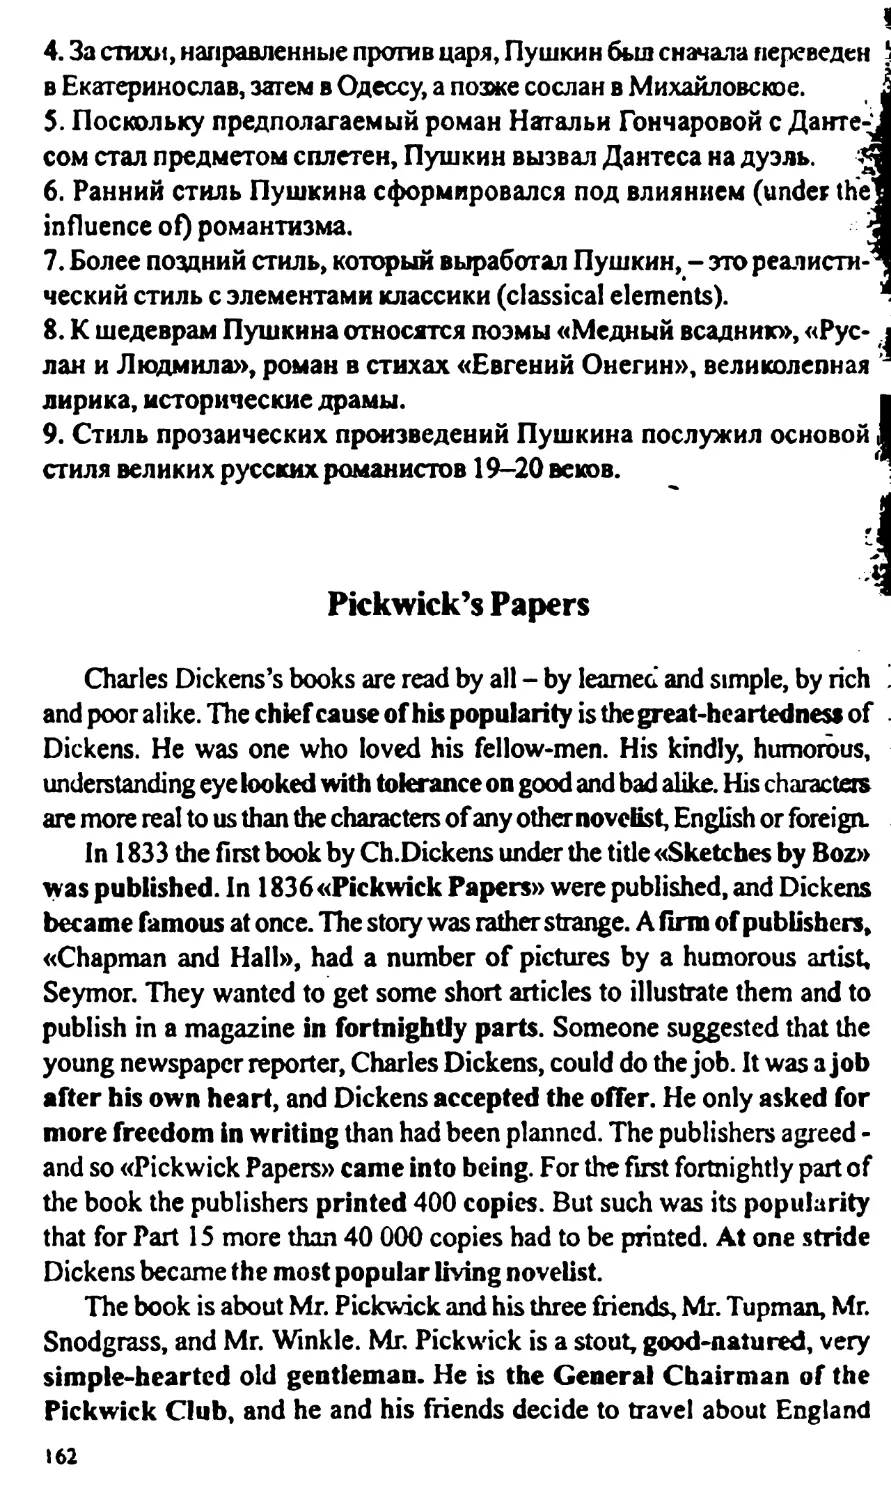 Pickwick’s Papers